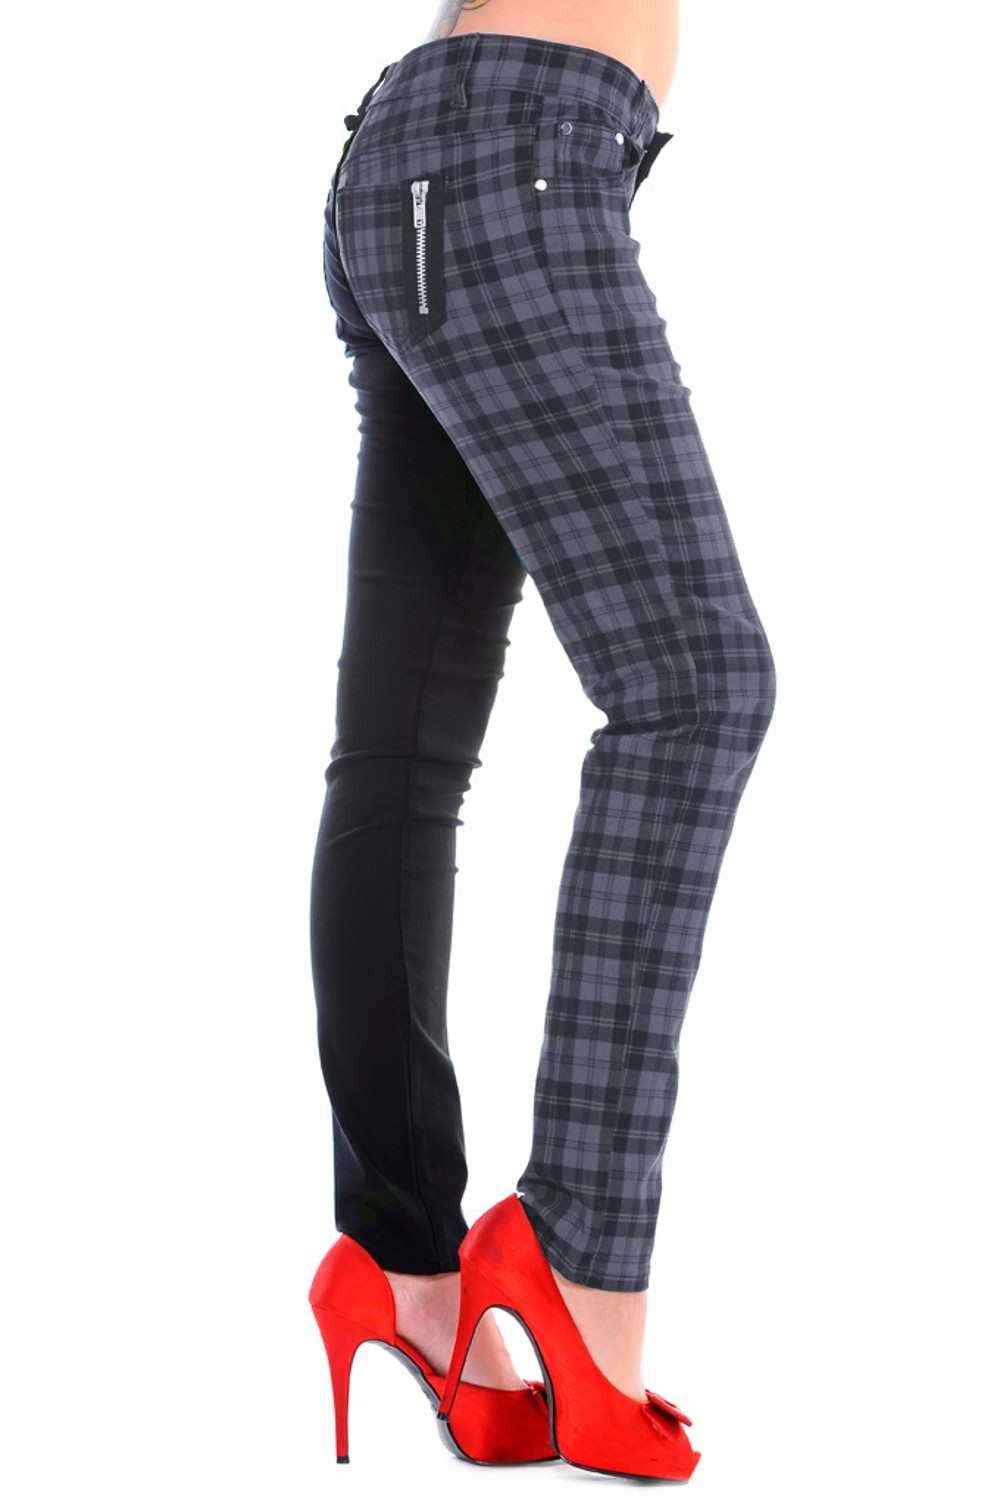 Grey tartan check trousers with one leg black, low rise. 